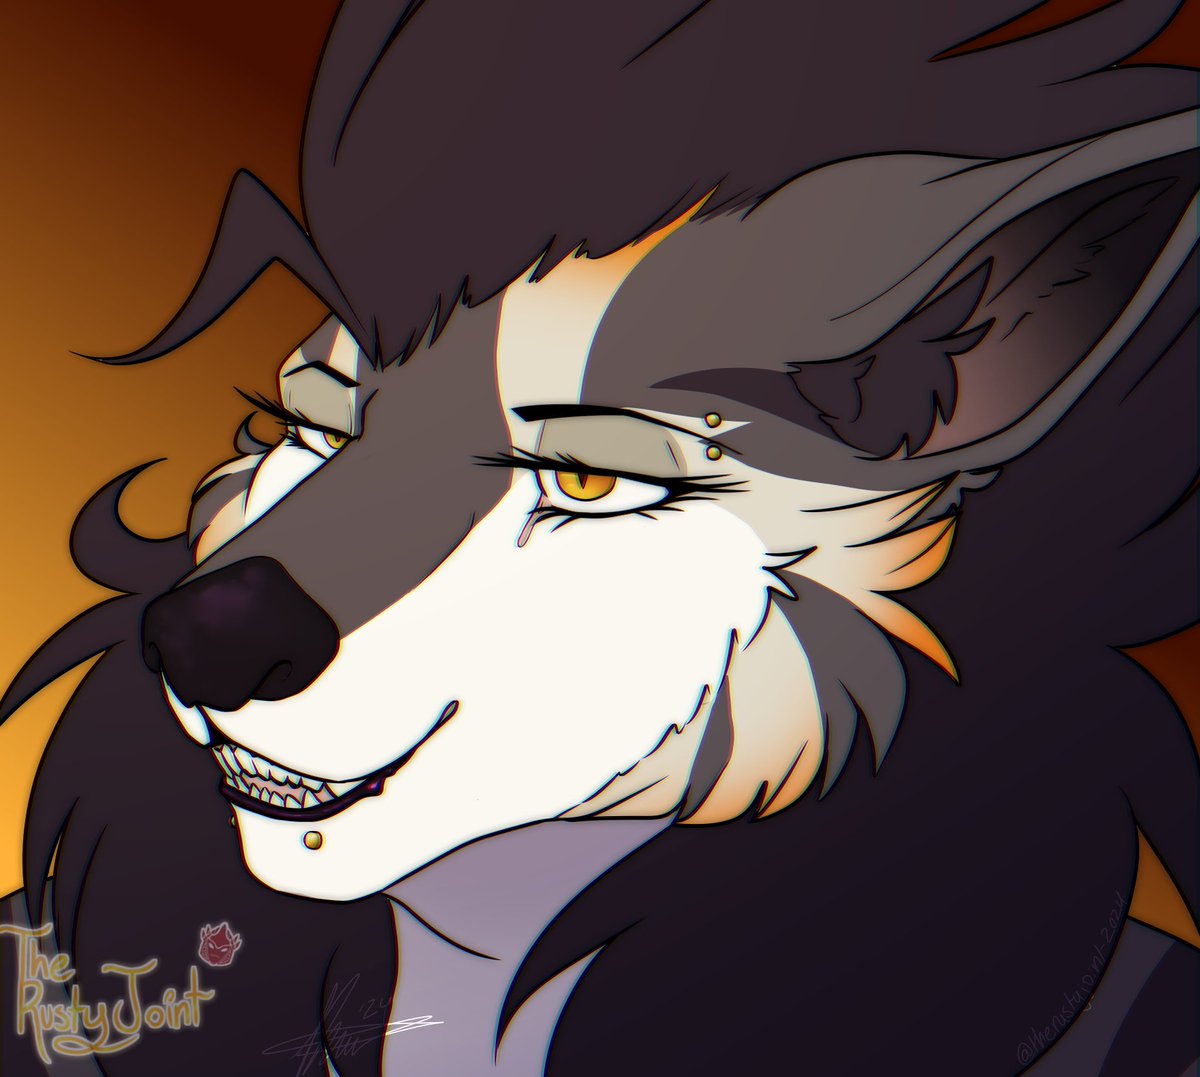 LOOK AT THE QUOTED POST. LOOK AT IT AND LOVE IT. AND GO GIVE THE ARTIST LOVE TOO. GOOD SHIT GOOD SHIT GOOD SHIT!!!!!

THIS IS WHAT I MADE FOR THEM OF THEIR ARCANINE (POSSIBLY MIGHTYENA CROSS?) GIRLIE

#arttrade #art #digitalart #furry #POKEMON